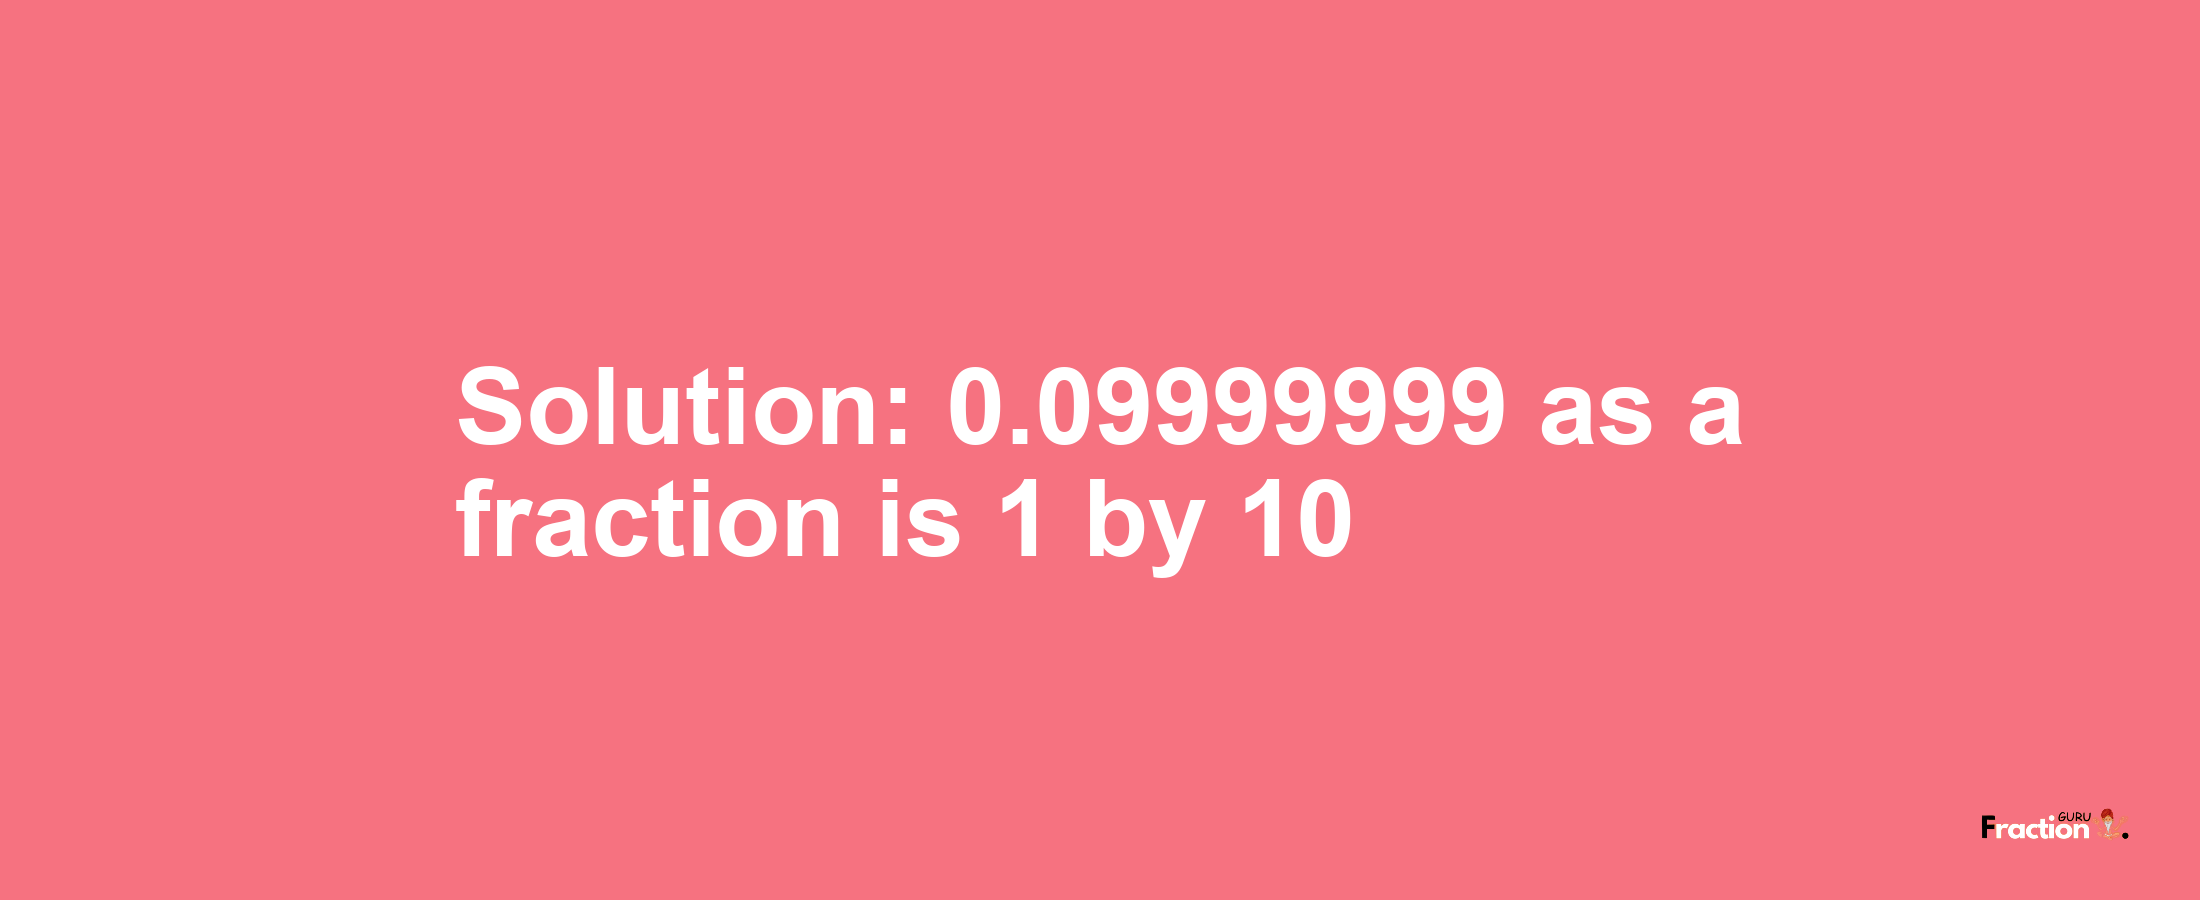 Solution:0.09999999 as a fraction is 1/10